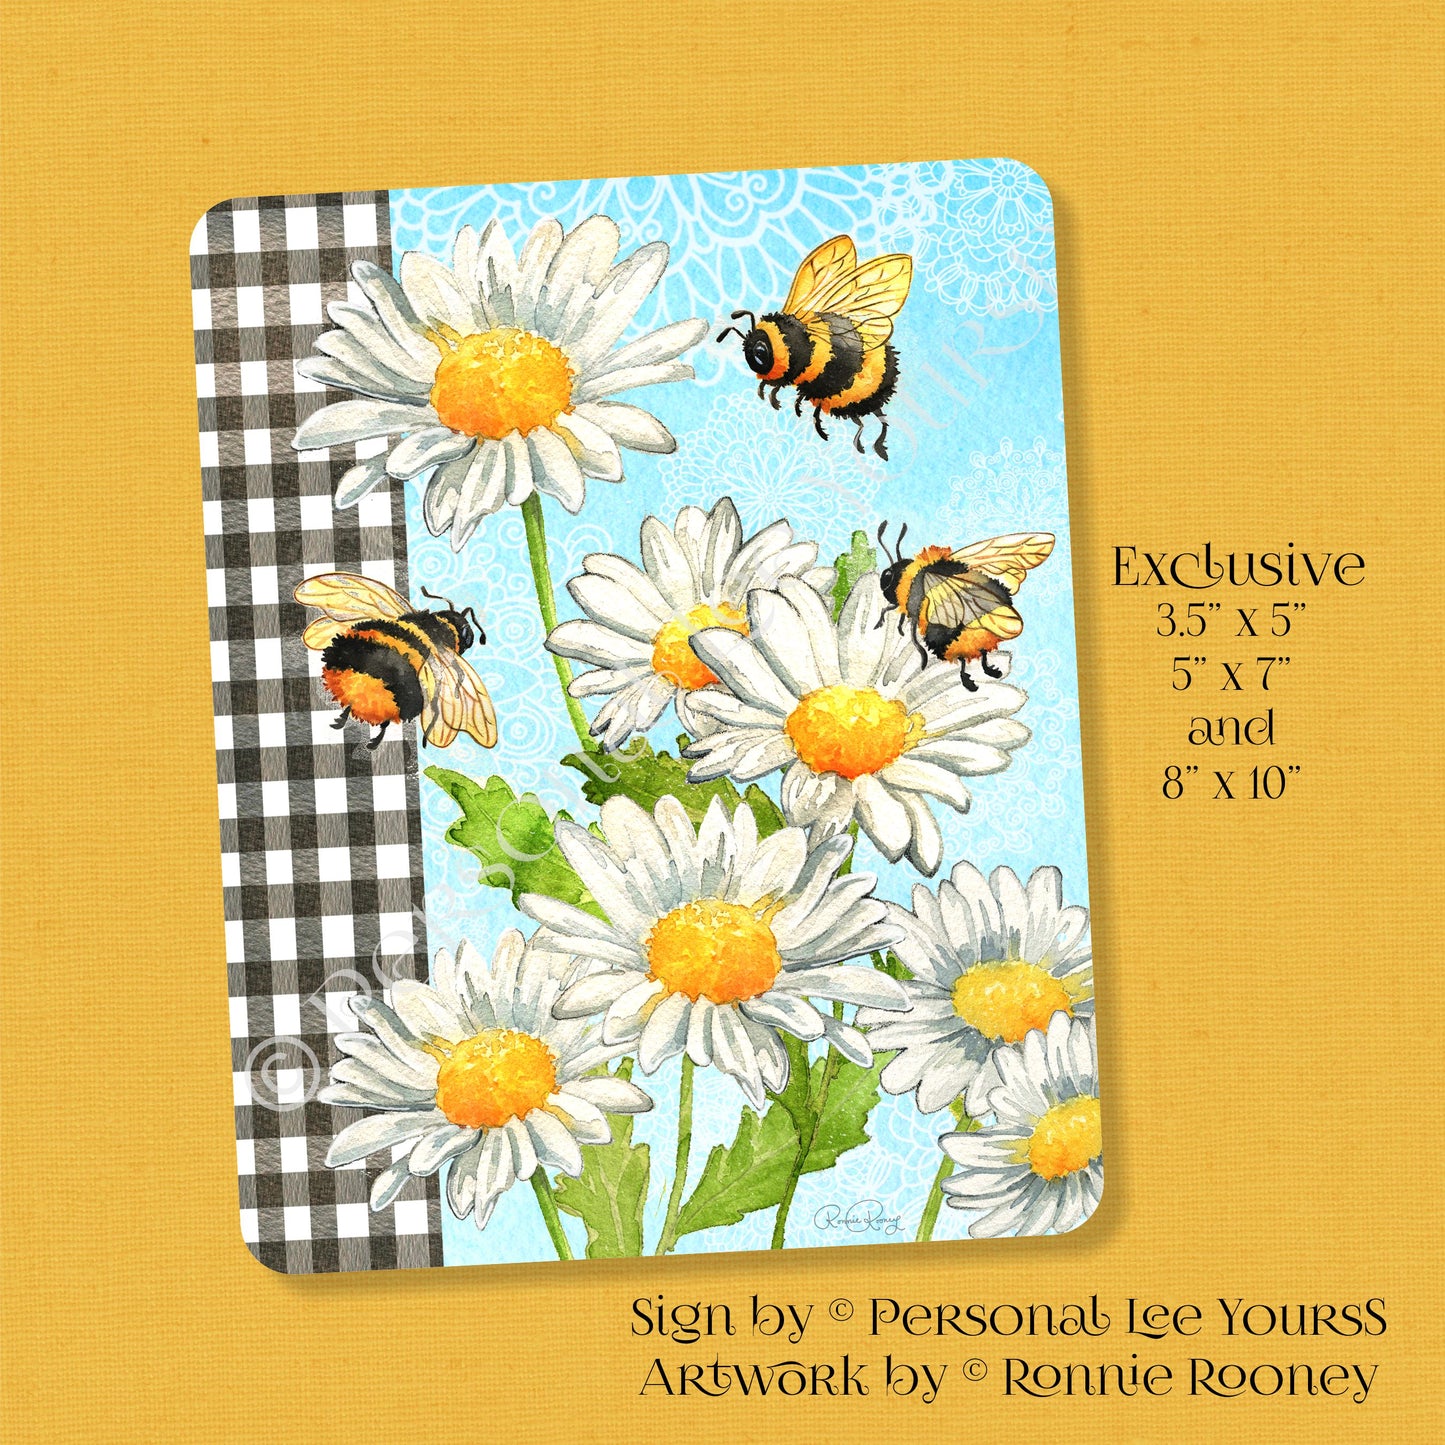 Ronnie Rooney Exclusive Sign * Buzzing Bees ~ Daisies * Vertical * 3 Sizes * Lightweight Metal